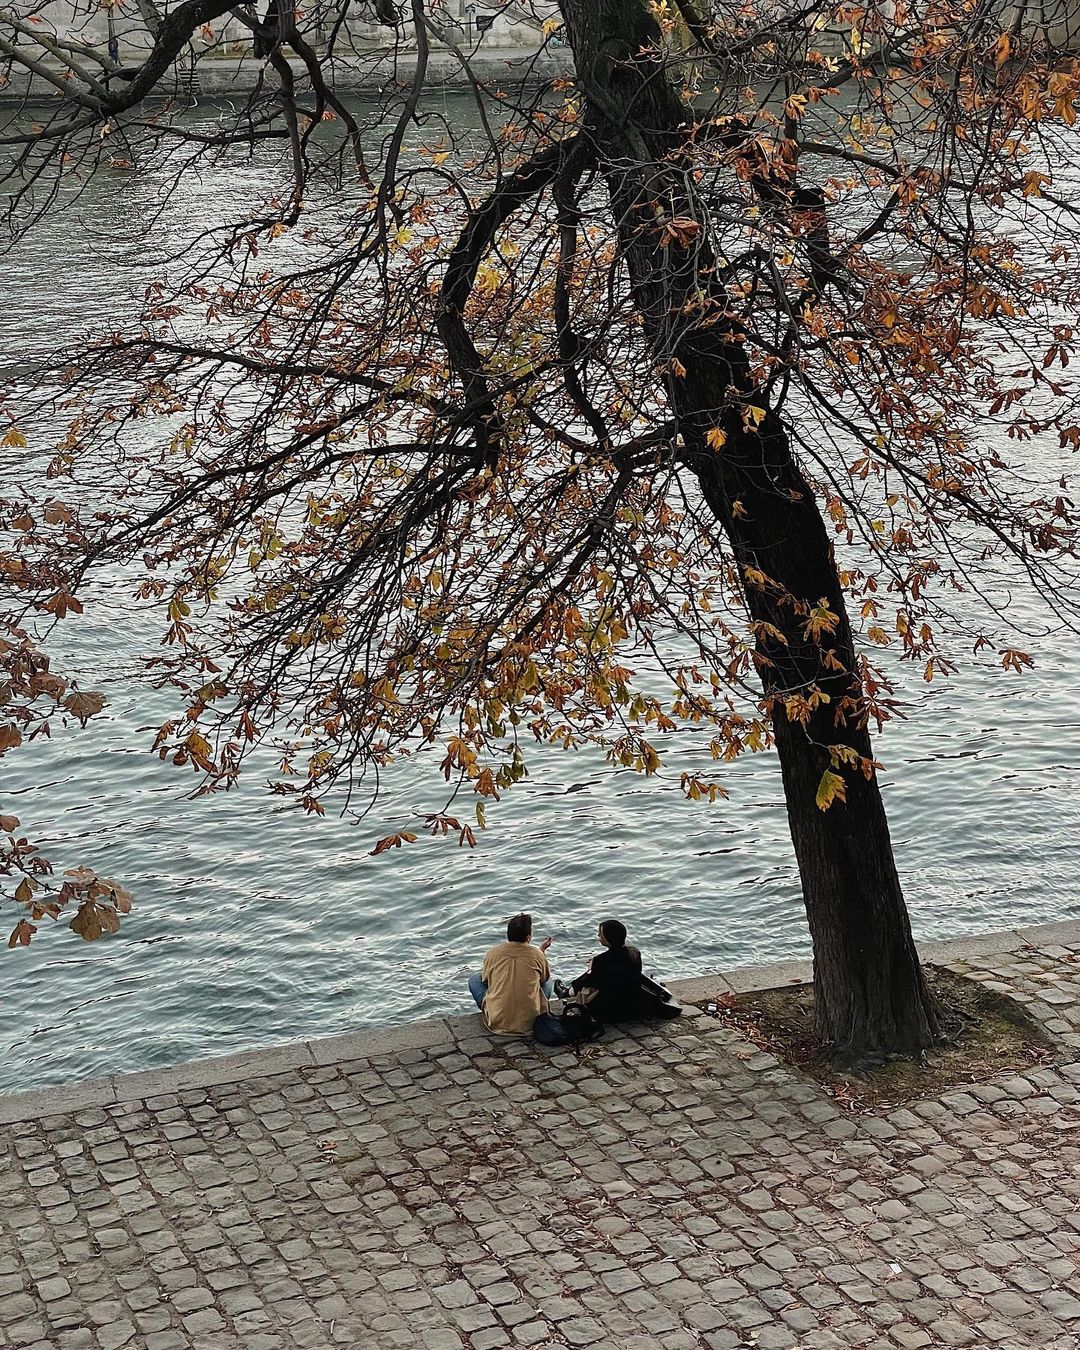 A couple shares a picnic along the Seine during fall